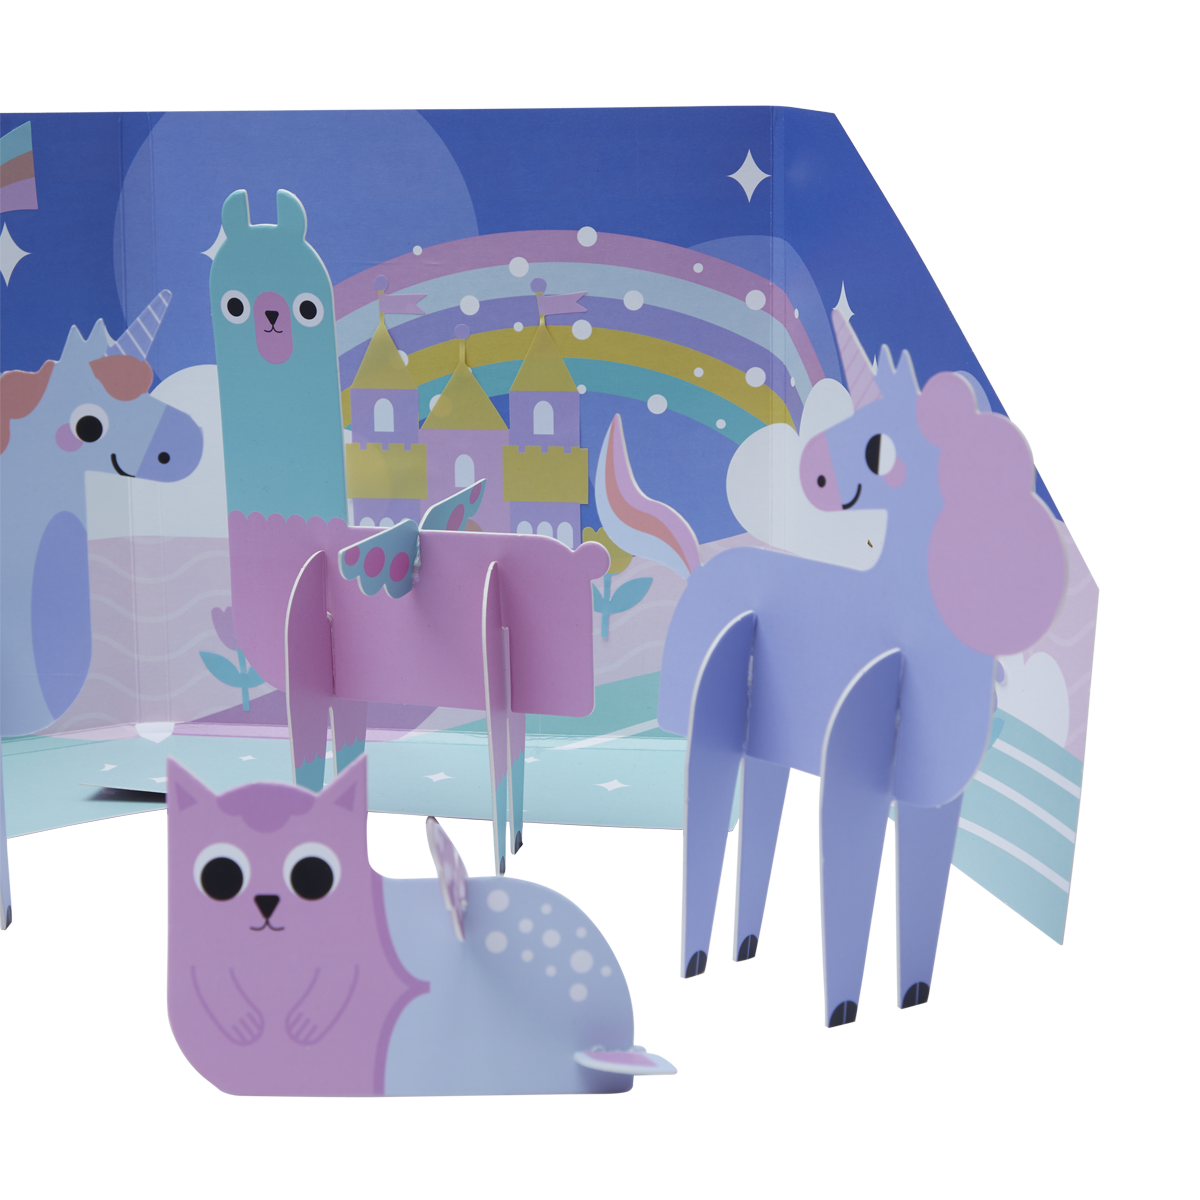 OOLY view of Pop! Make and Play Activity Scene - Magical Creatures in use